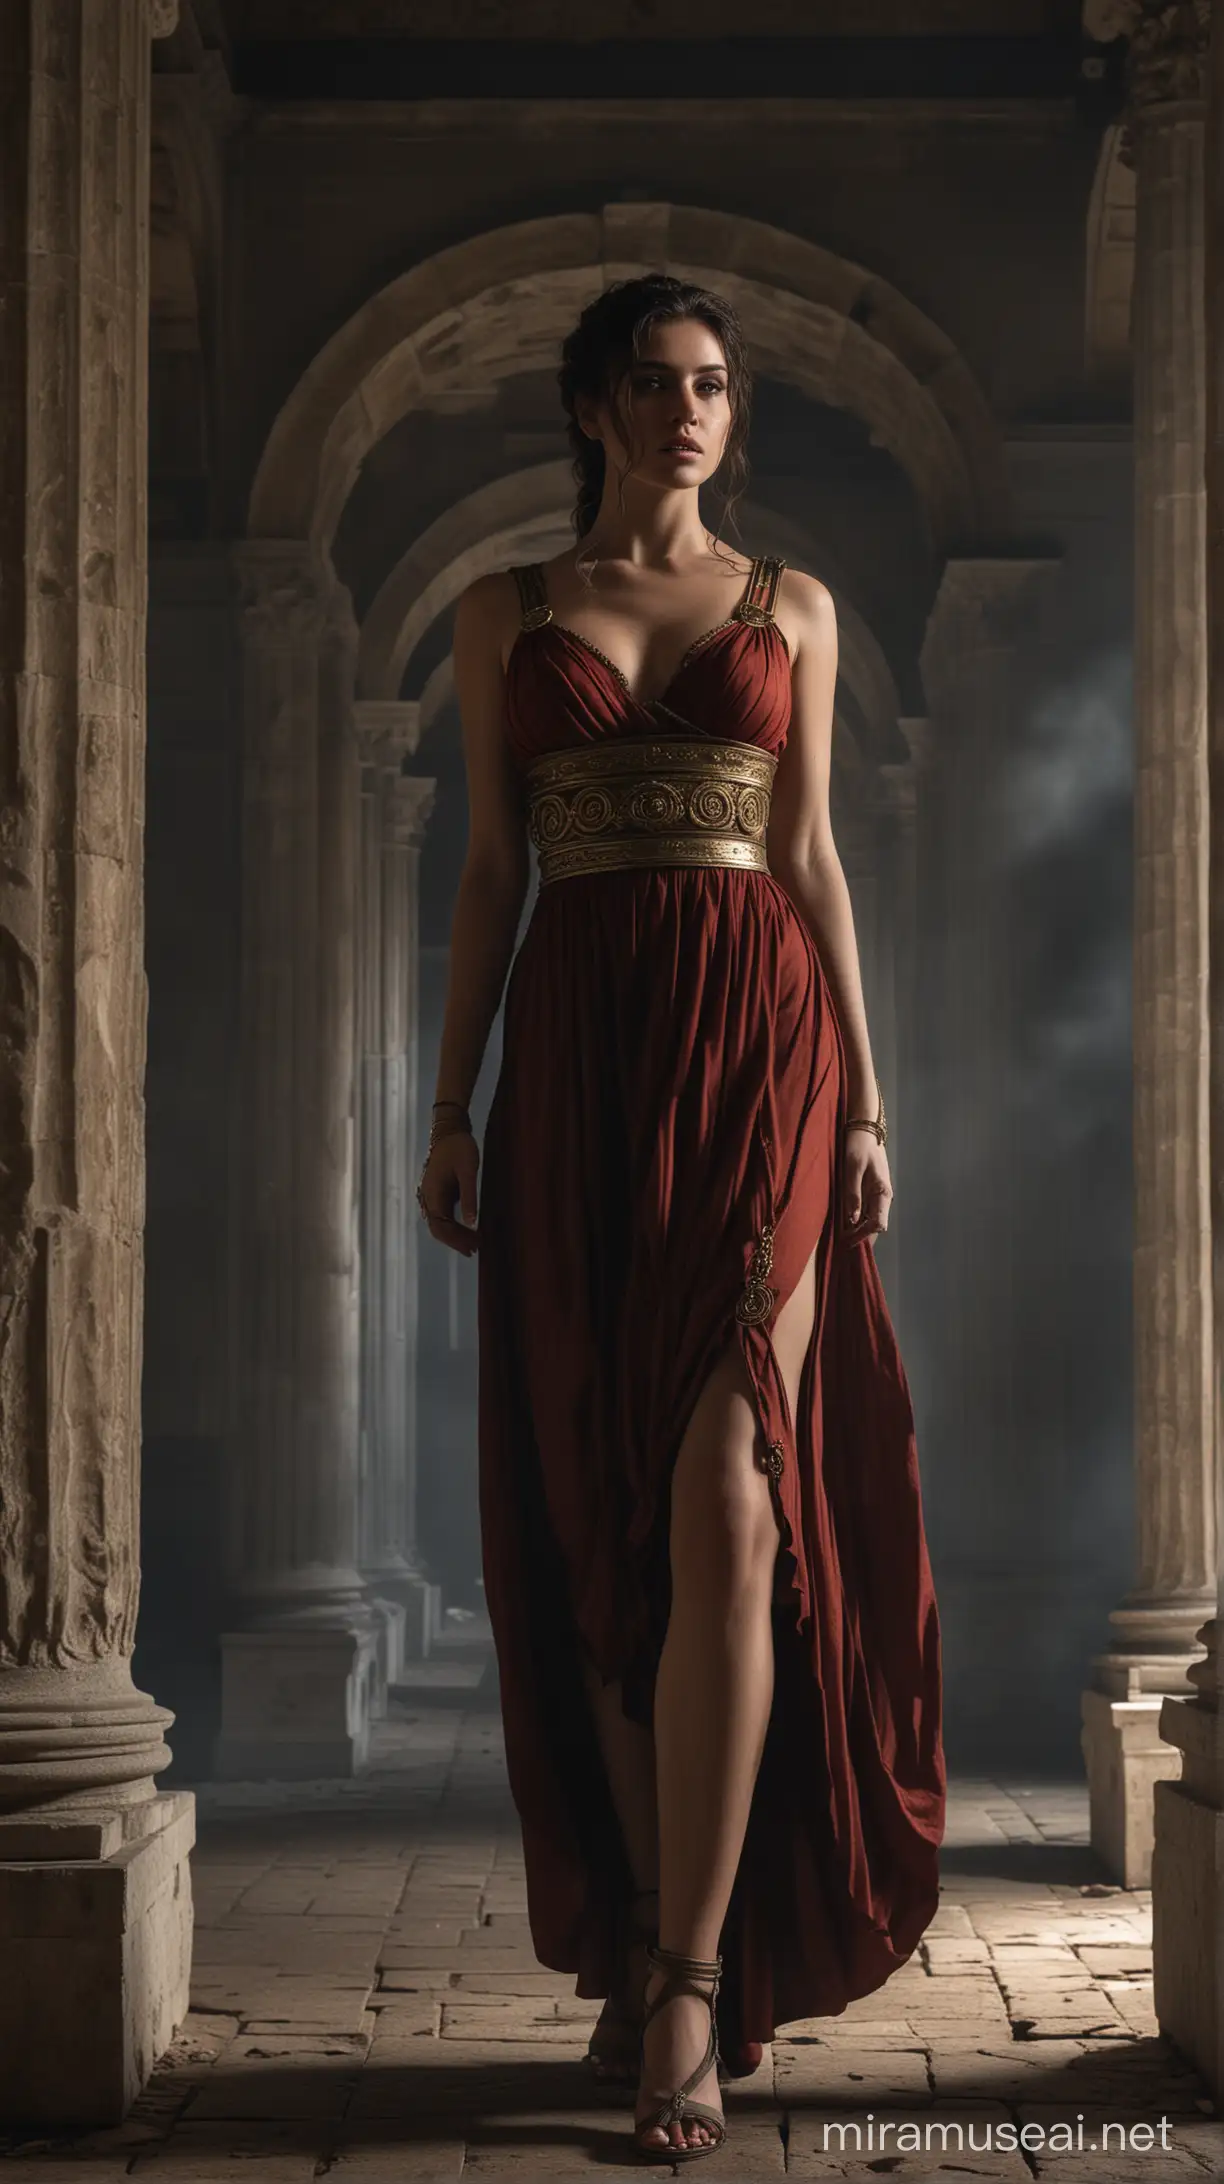 A (((hot and seductive woman))) dressed in (((ancient Roman attire))), ominous shadows falling across a (moody palace setting)